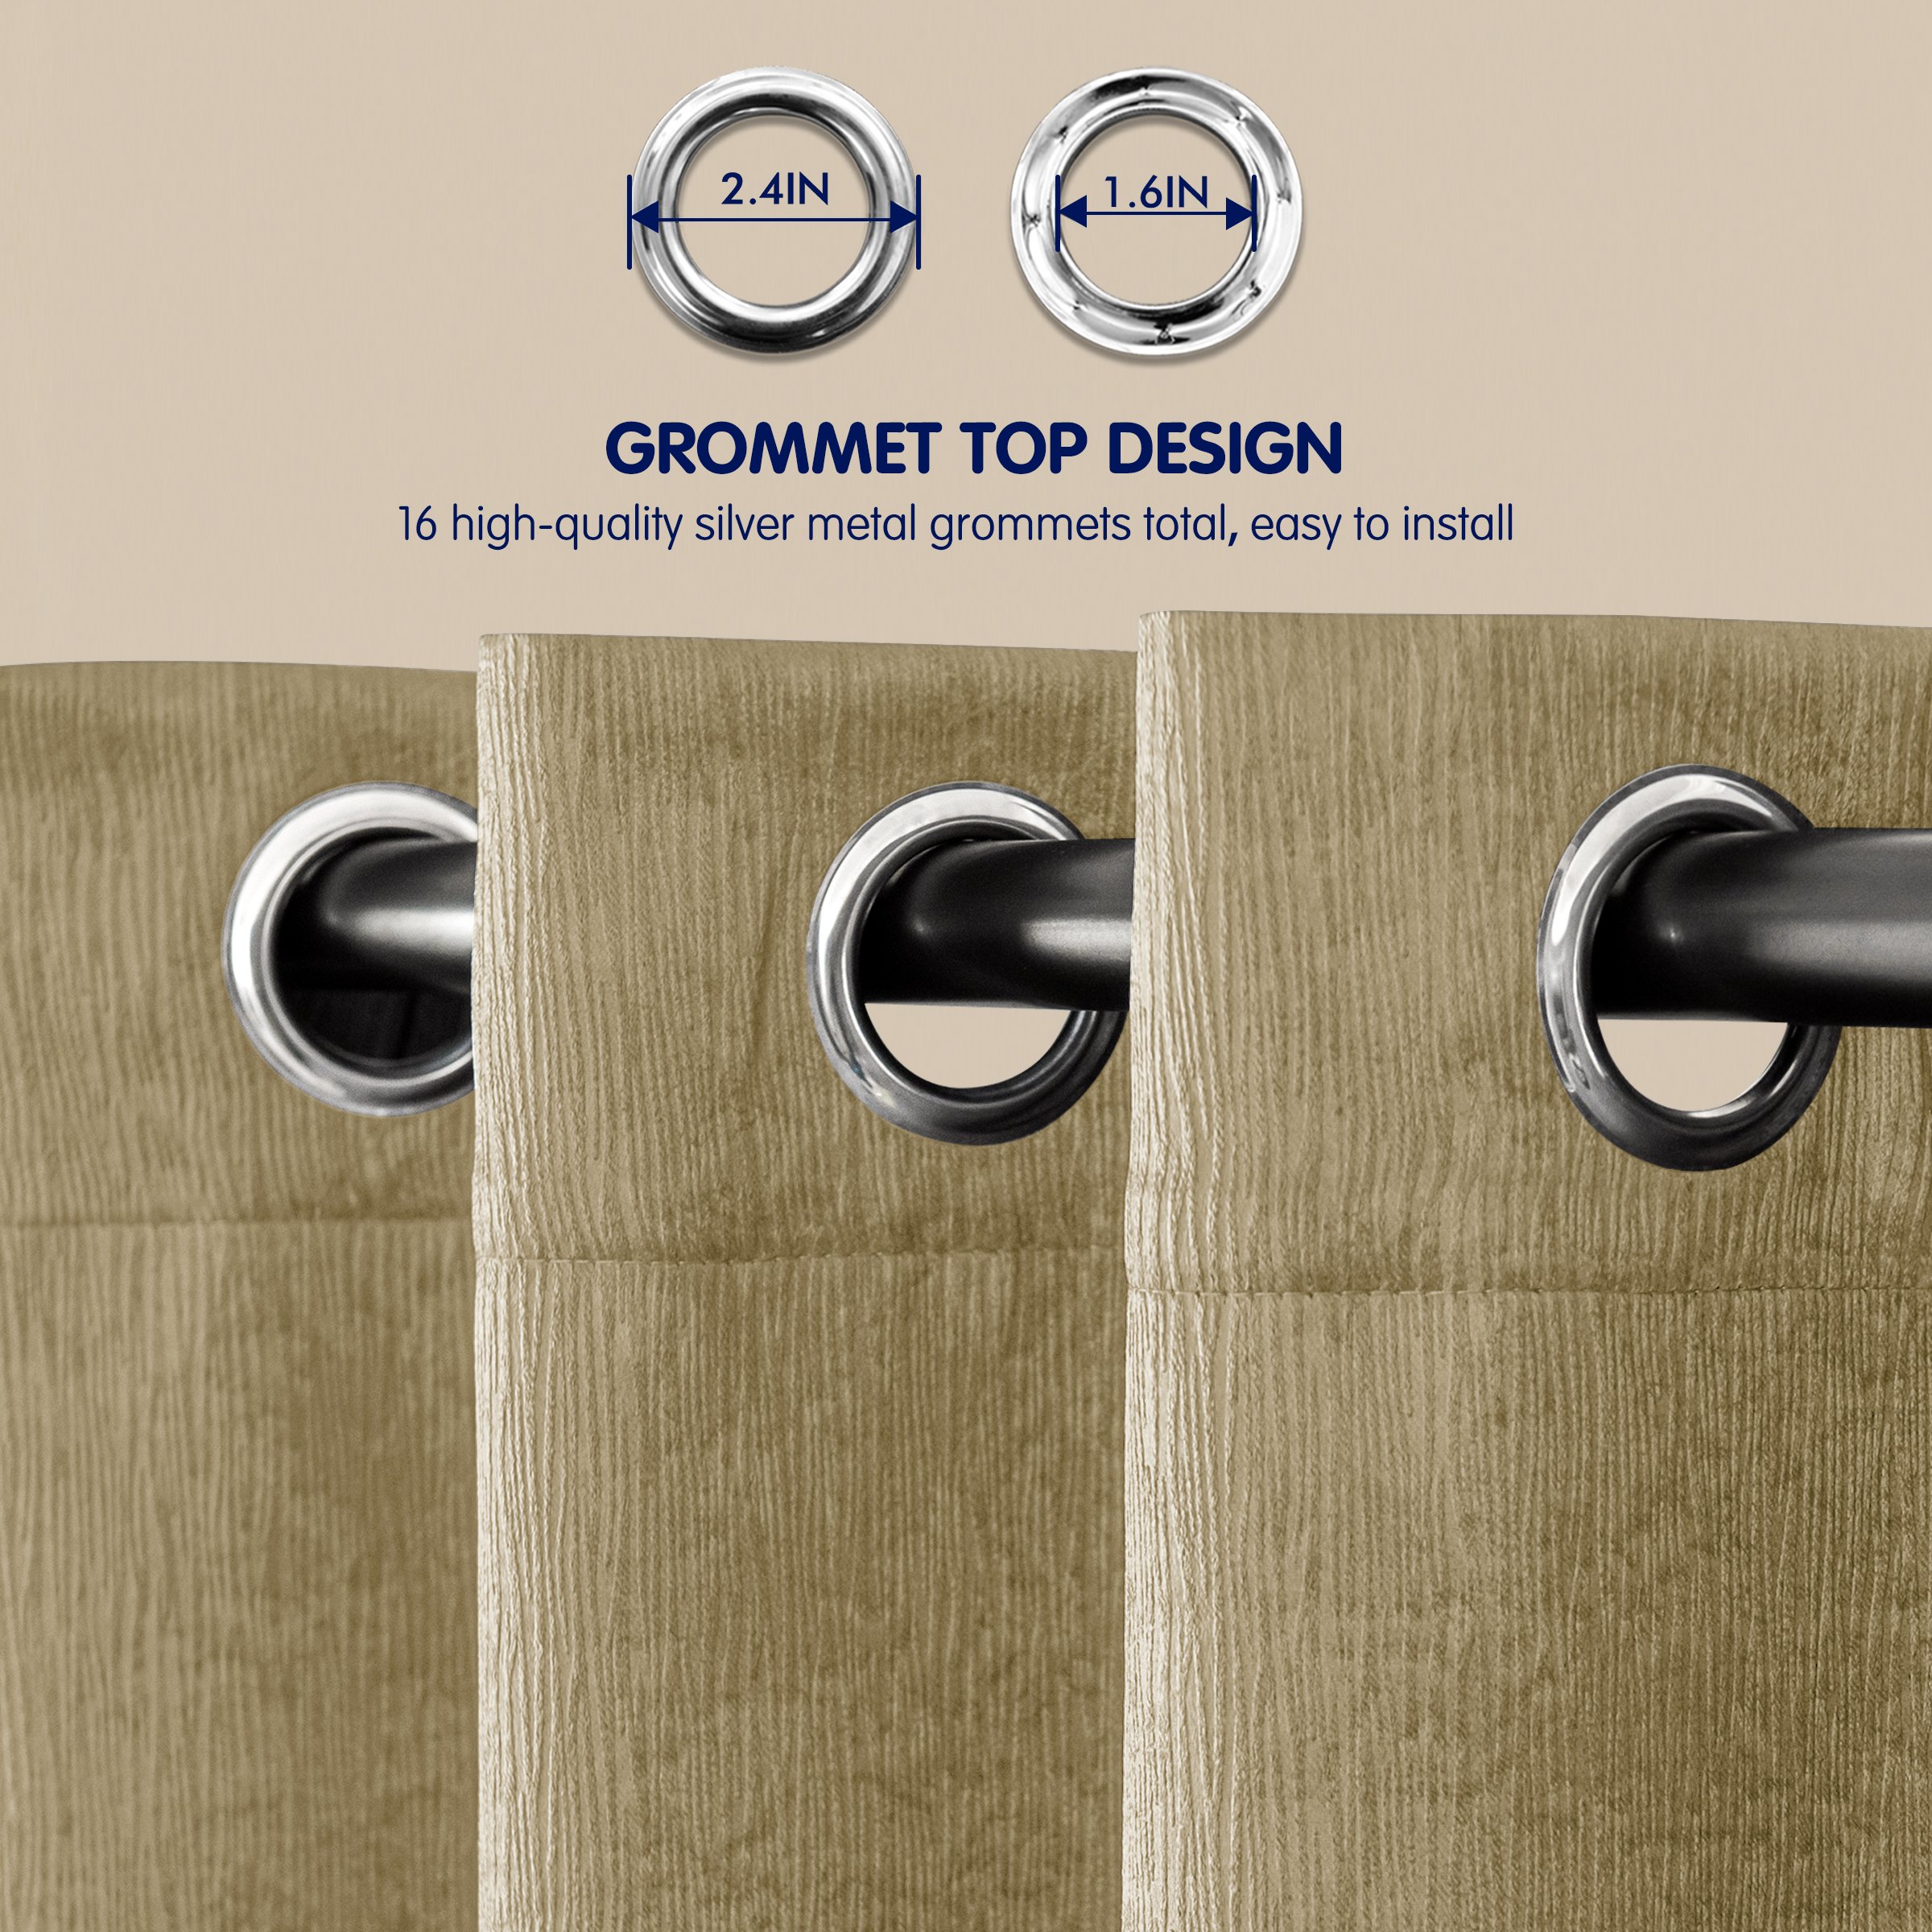 Subrtex Thermal Insulated Grommet Blackout Curtains for Bedroom, Set of 2 Panels, 53"×63", Beige - image 4 of 5